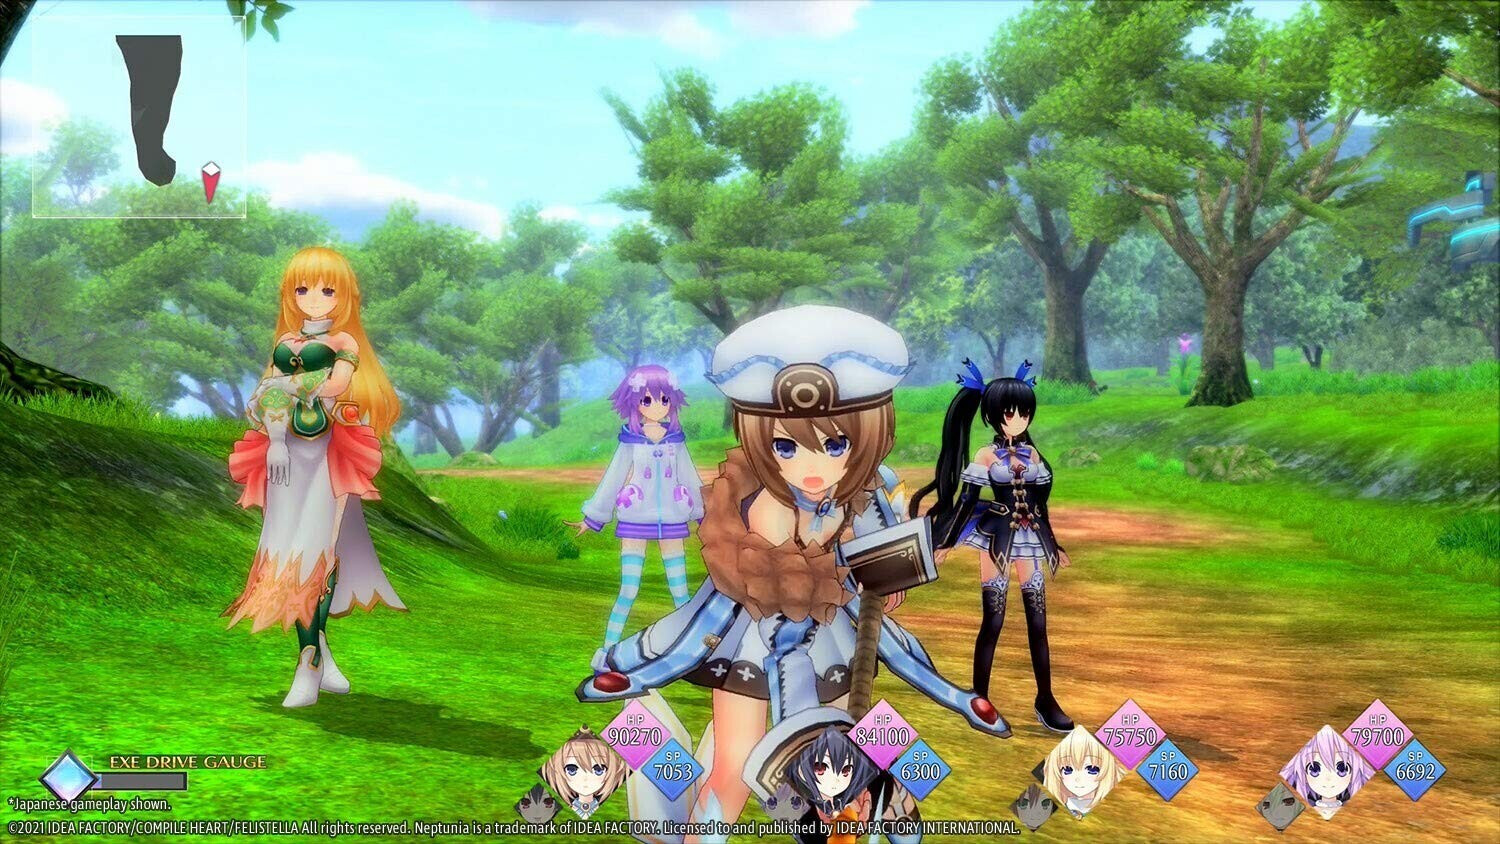 neptunia reverse day one edition